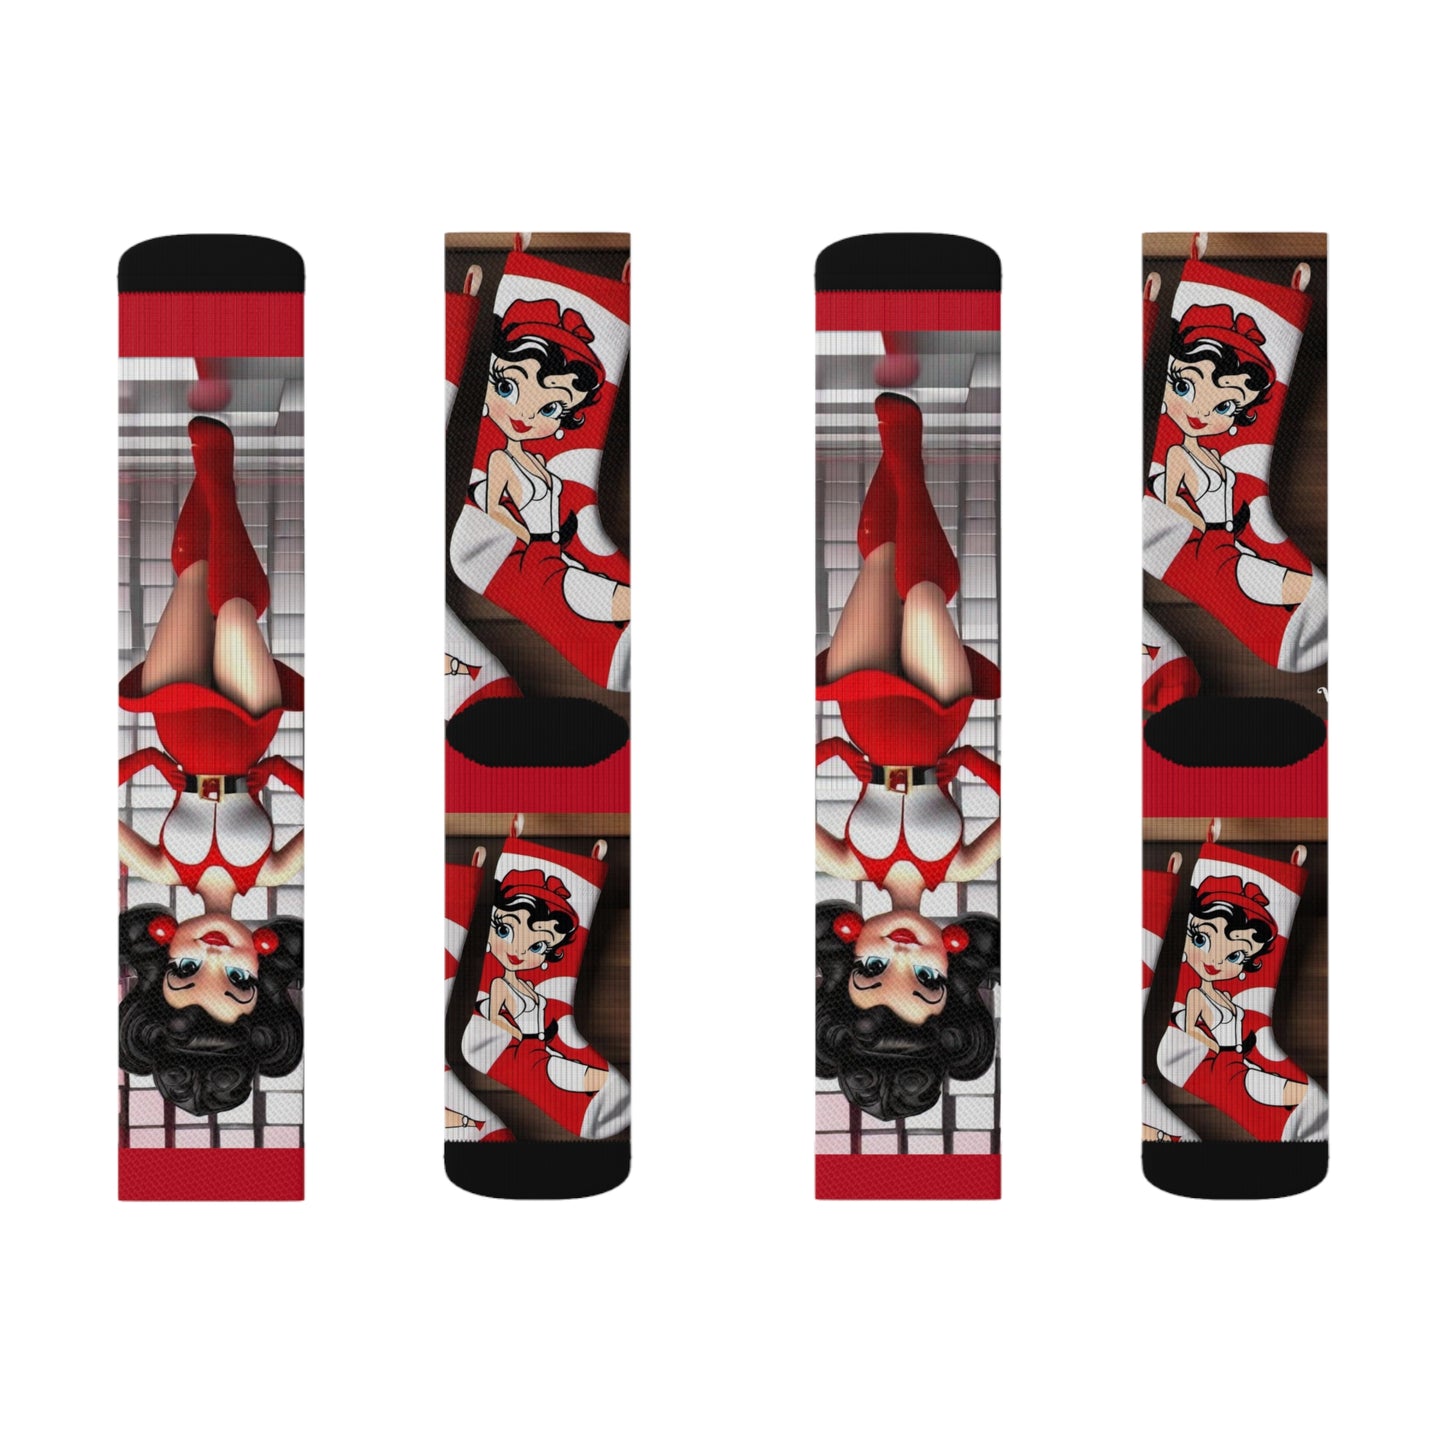 R&RH Red Boots Caricatures Socks